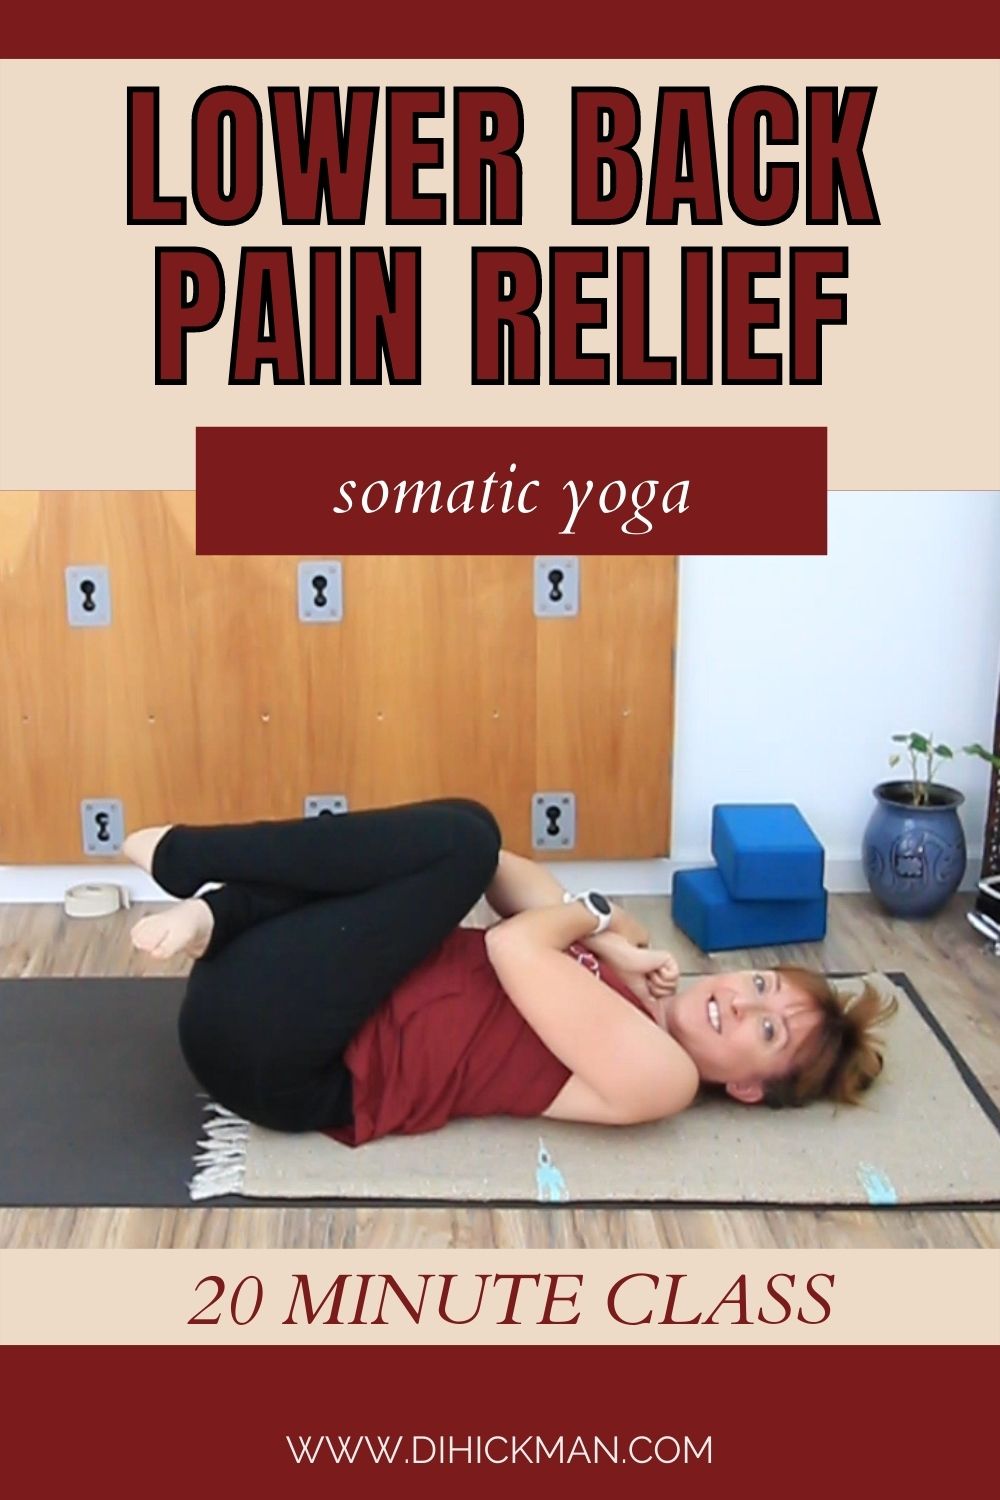 Lower back pain relief somatic yoga 20-minute class